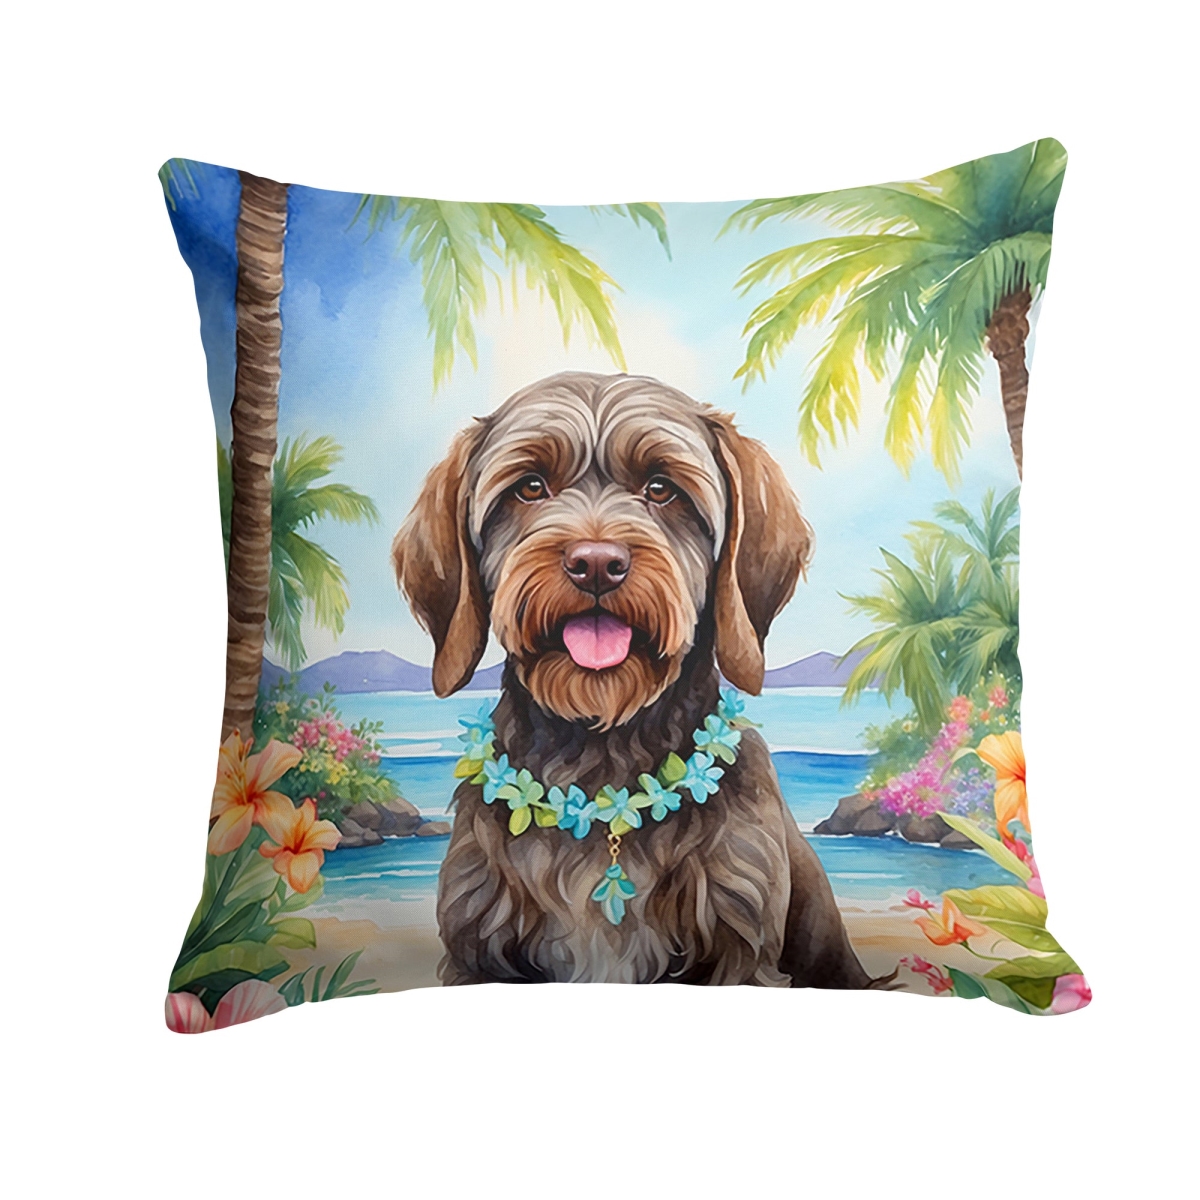 Picture of Carolines Treasures DAC6539PW1414 14 x 14 in. Unisex Wirehaired Pointing Griffon Luau Throw Pillow